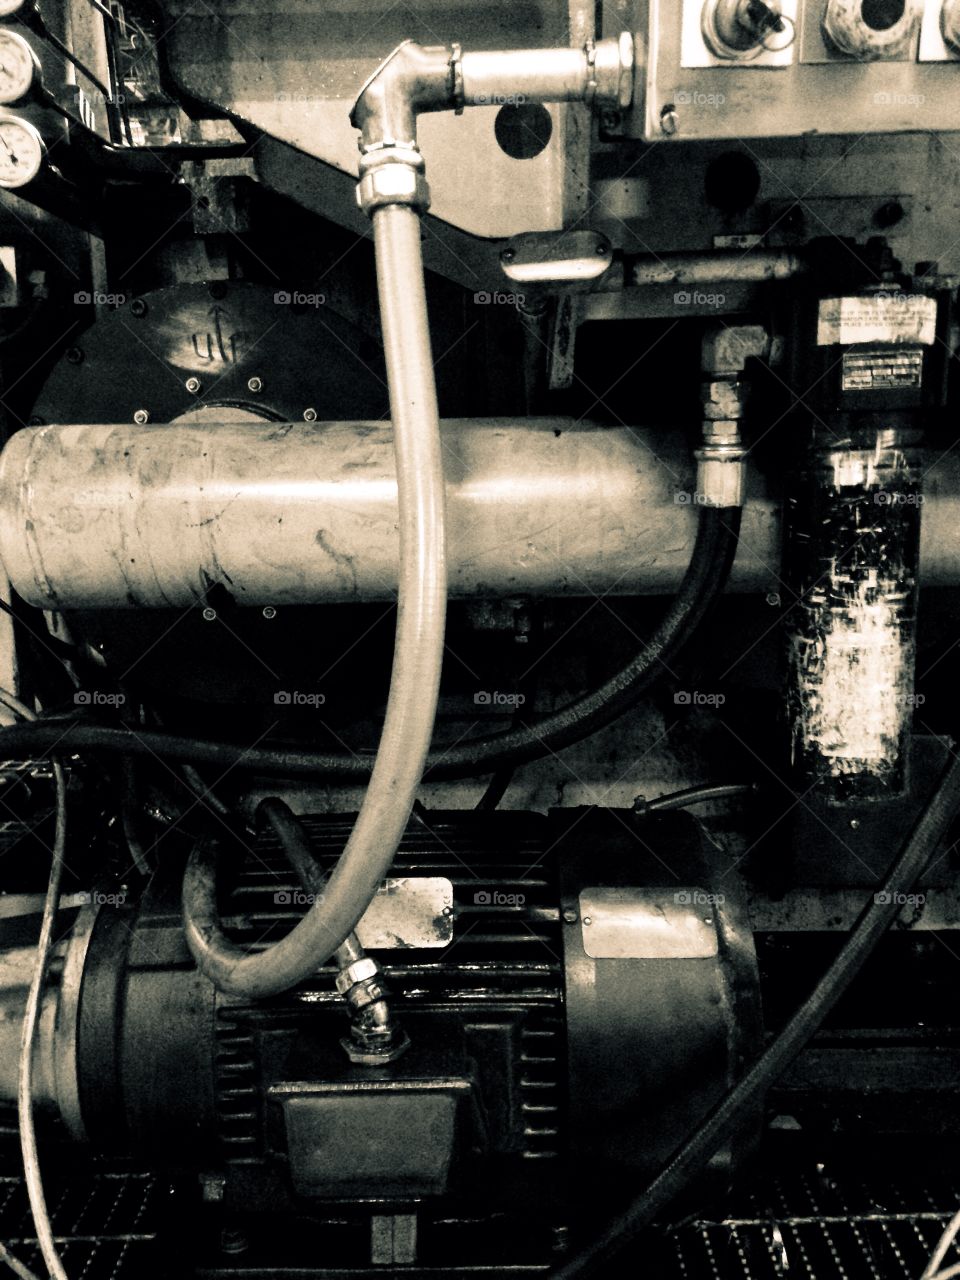 Industrial, machine, black and white, oil, grease, hoses